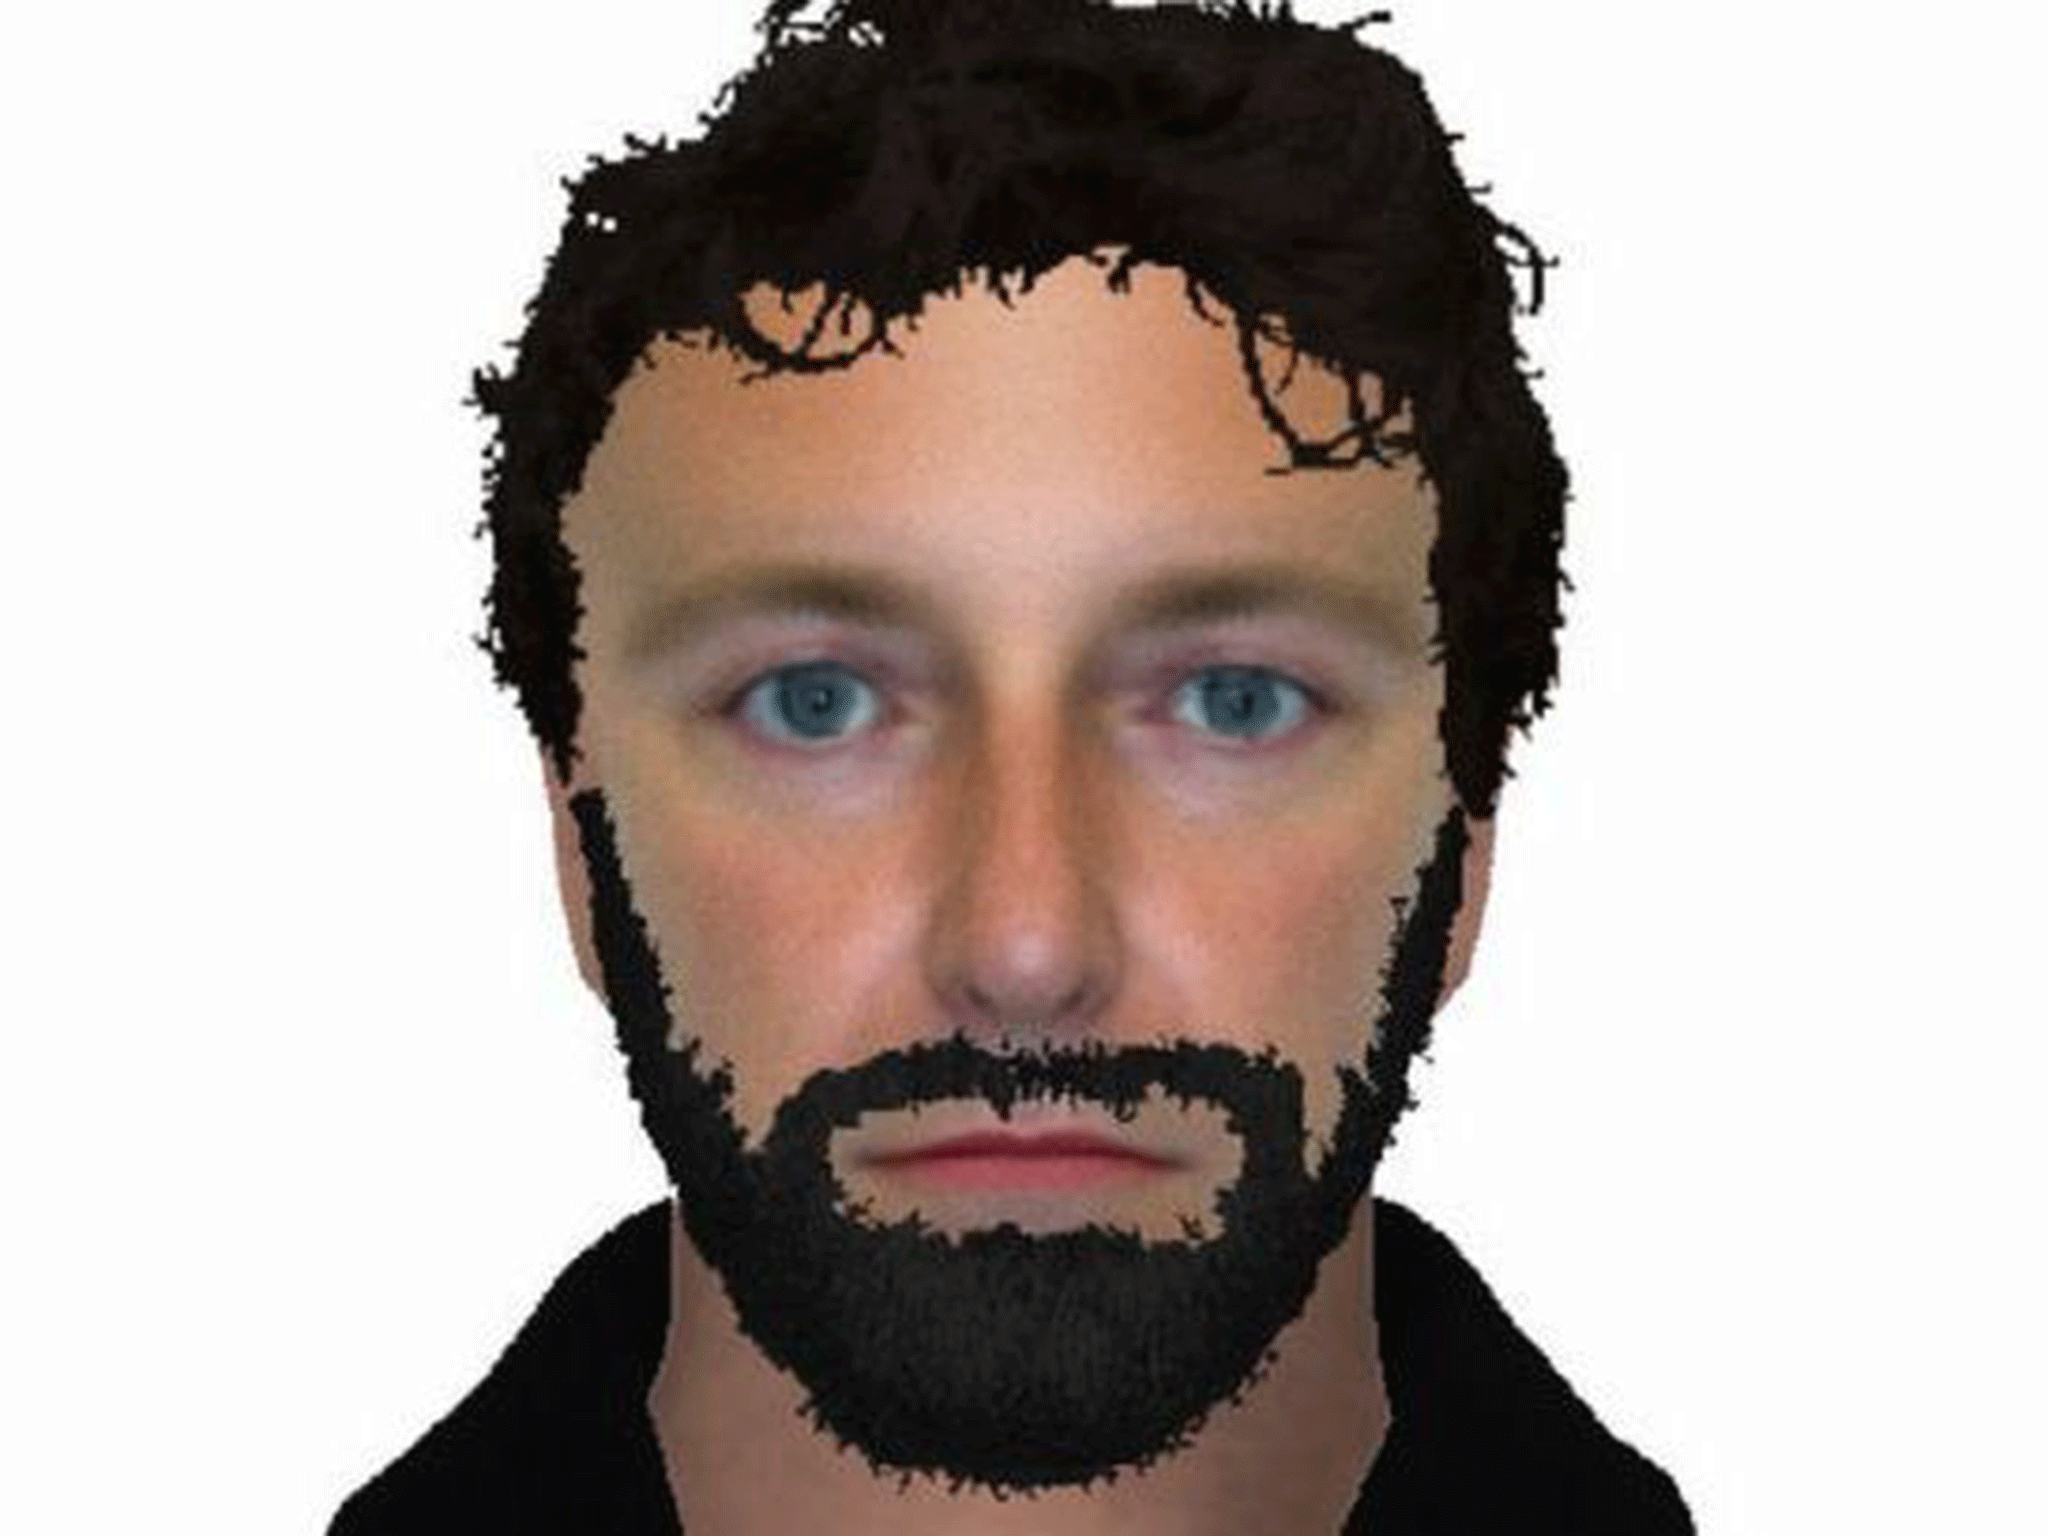 The e-fit by Cheshire Police was subjected to mockery on social media